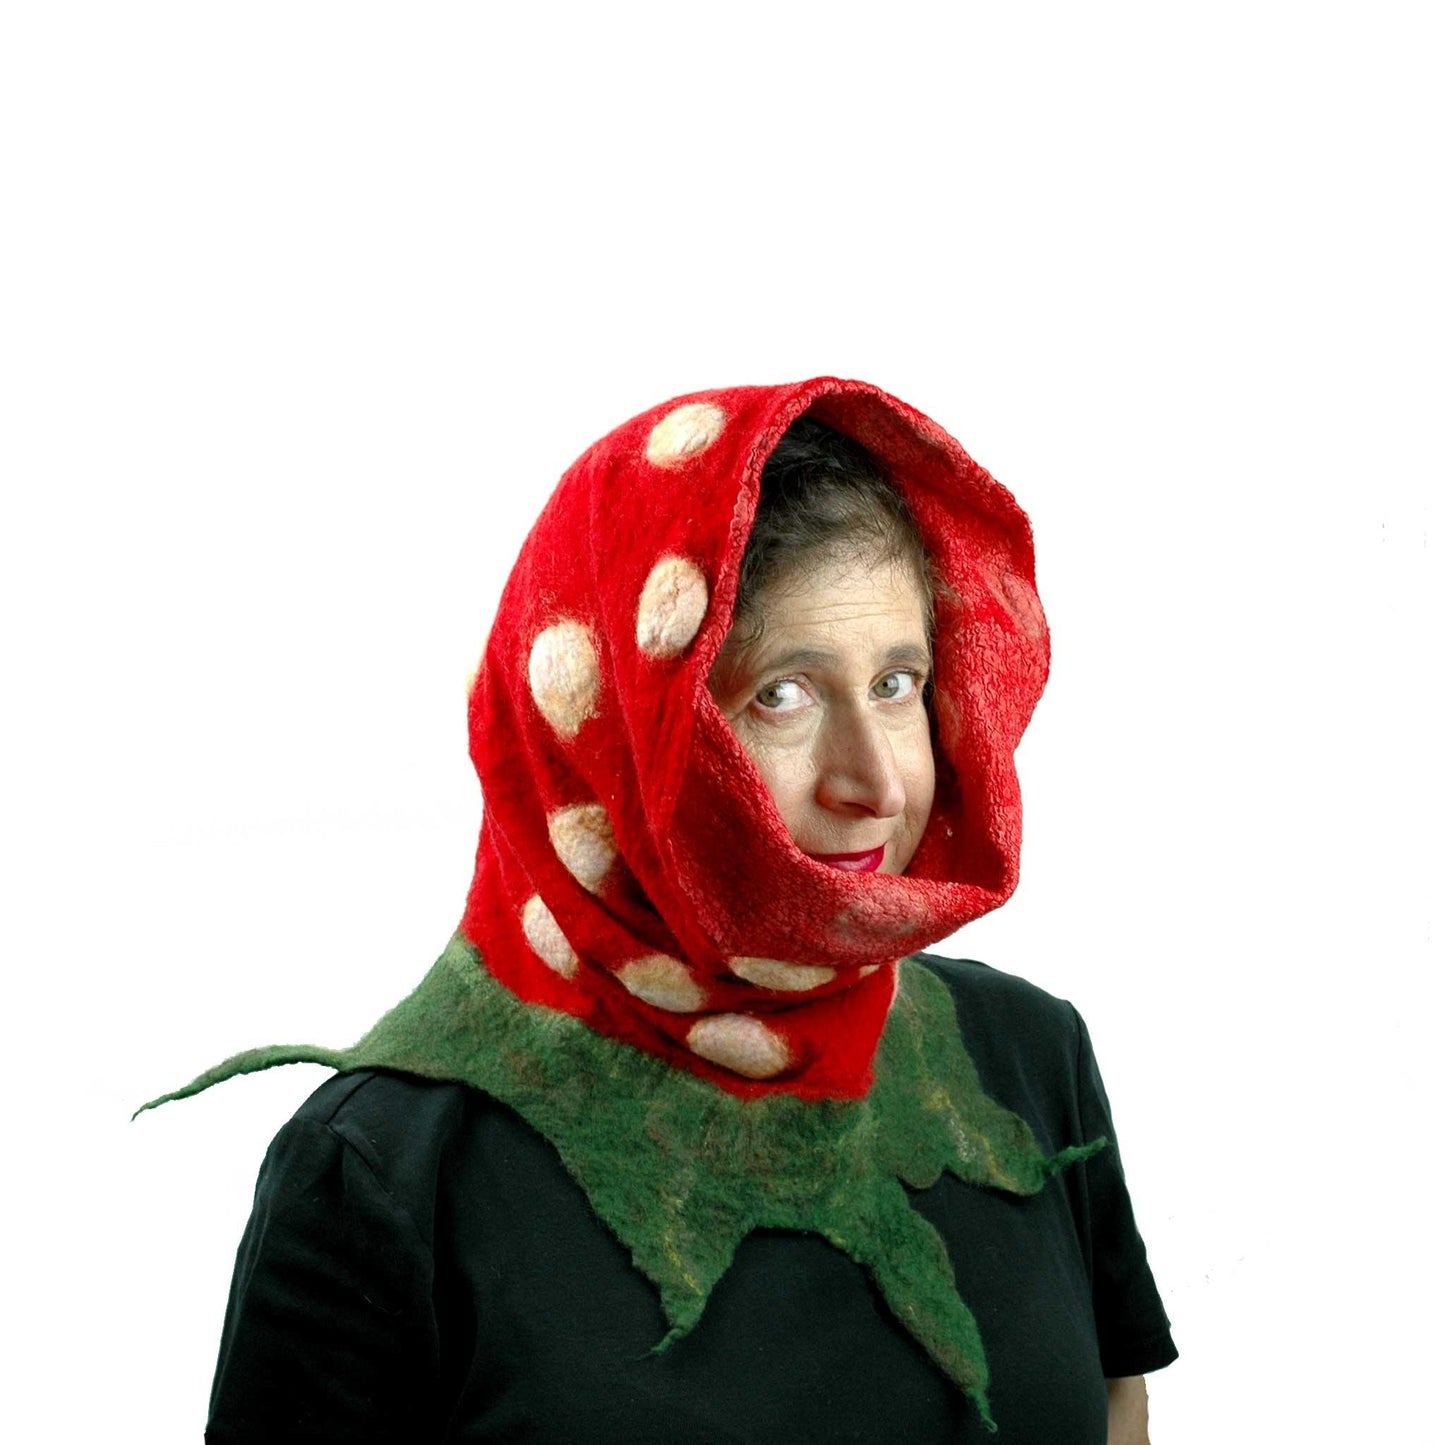 Felted Strawberry Cowl Infinity Scarf worn in the style of a Russian Babushka, over the head. 